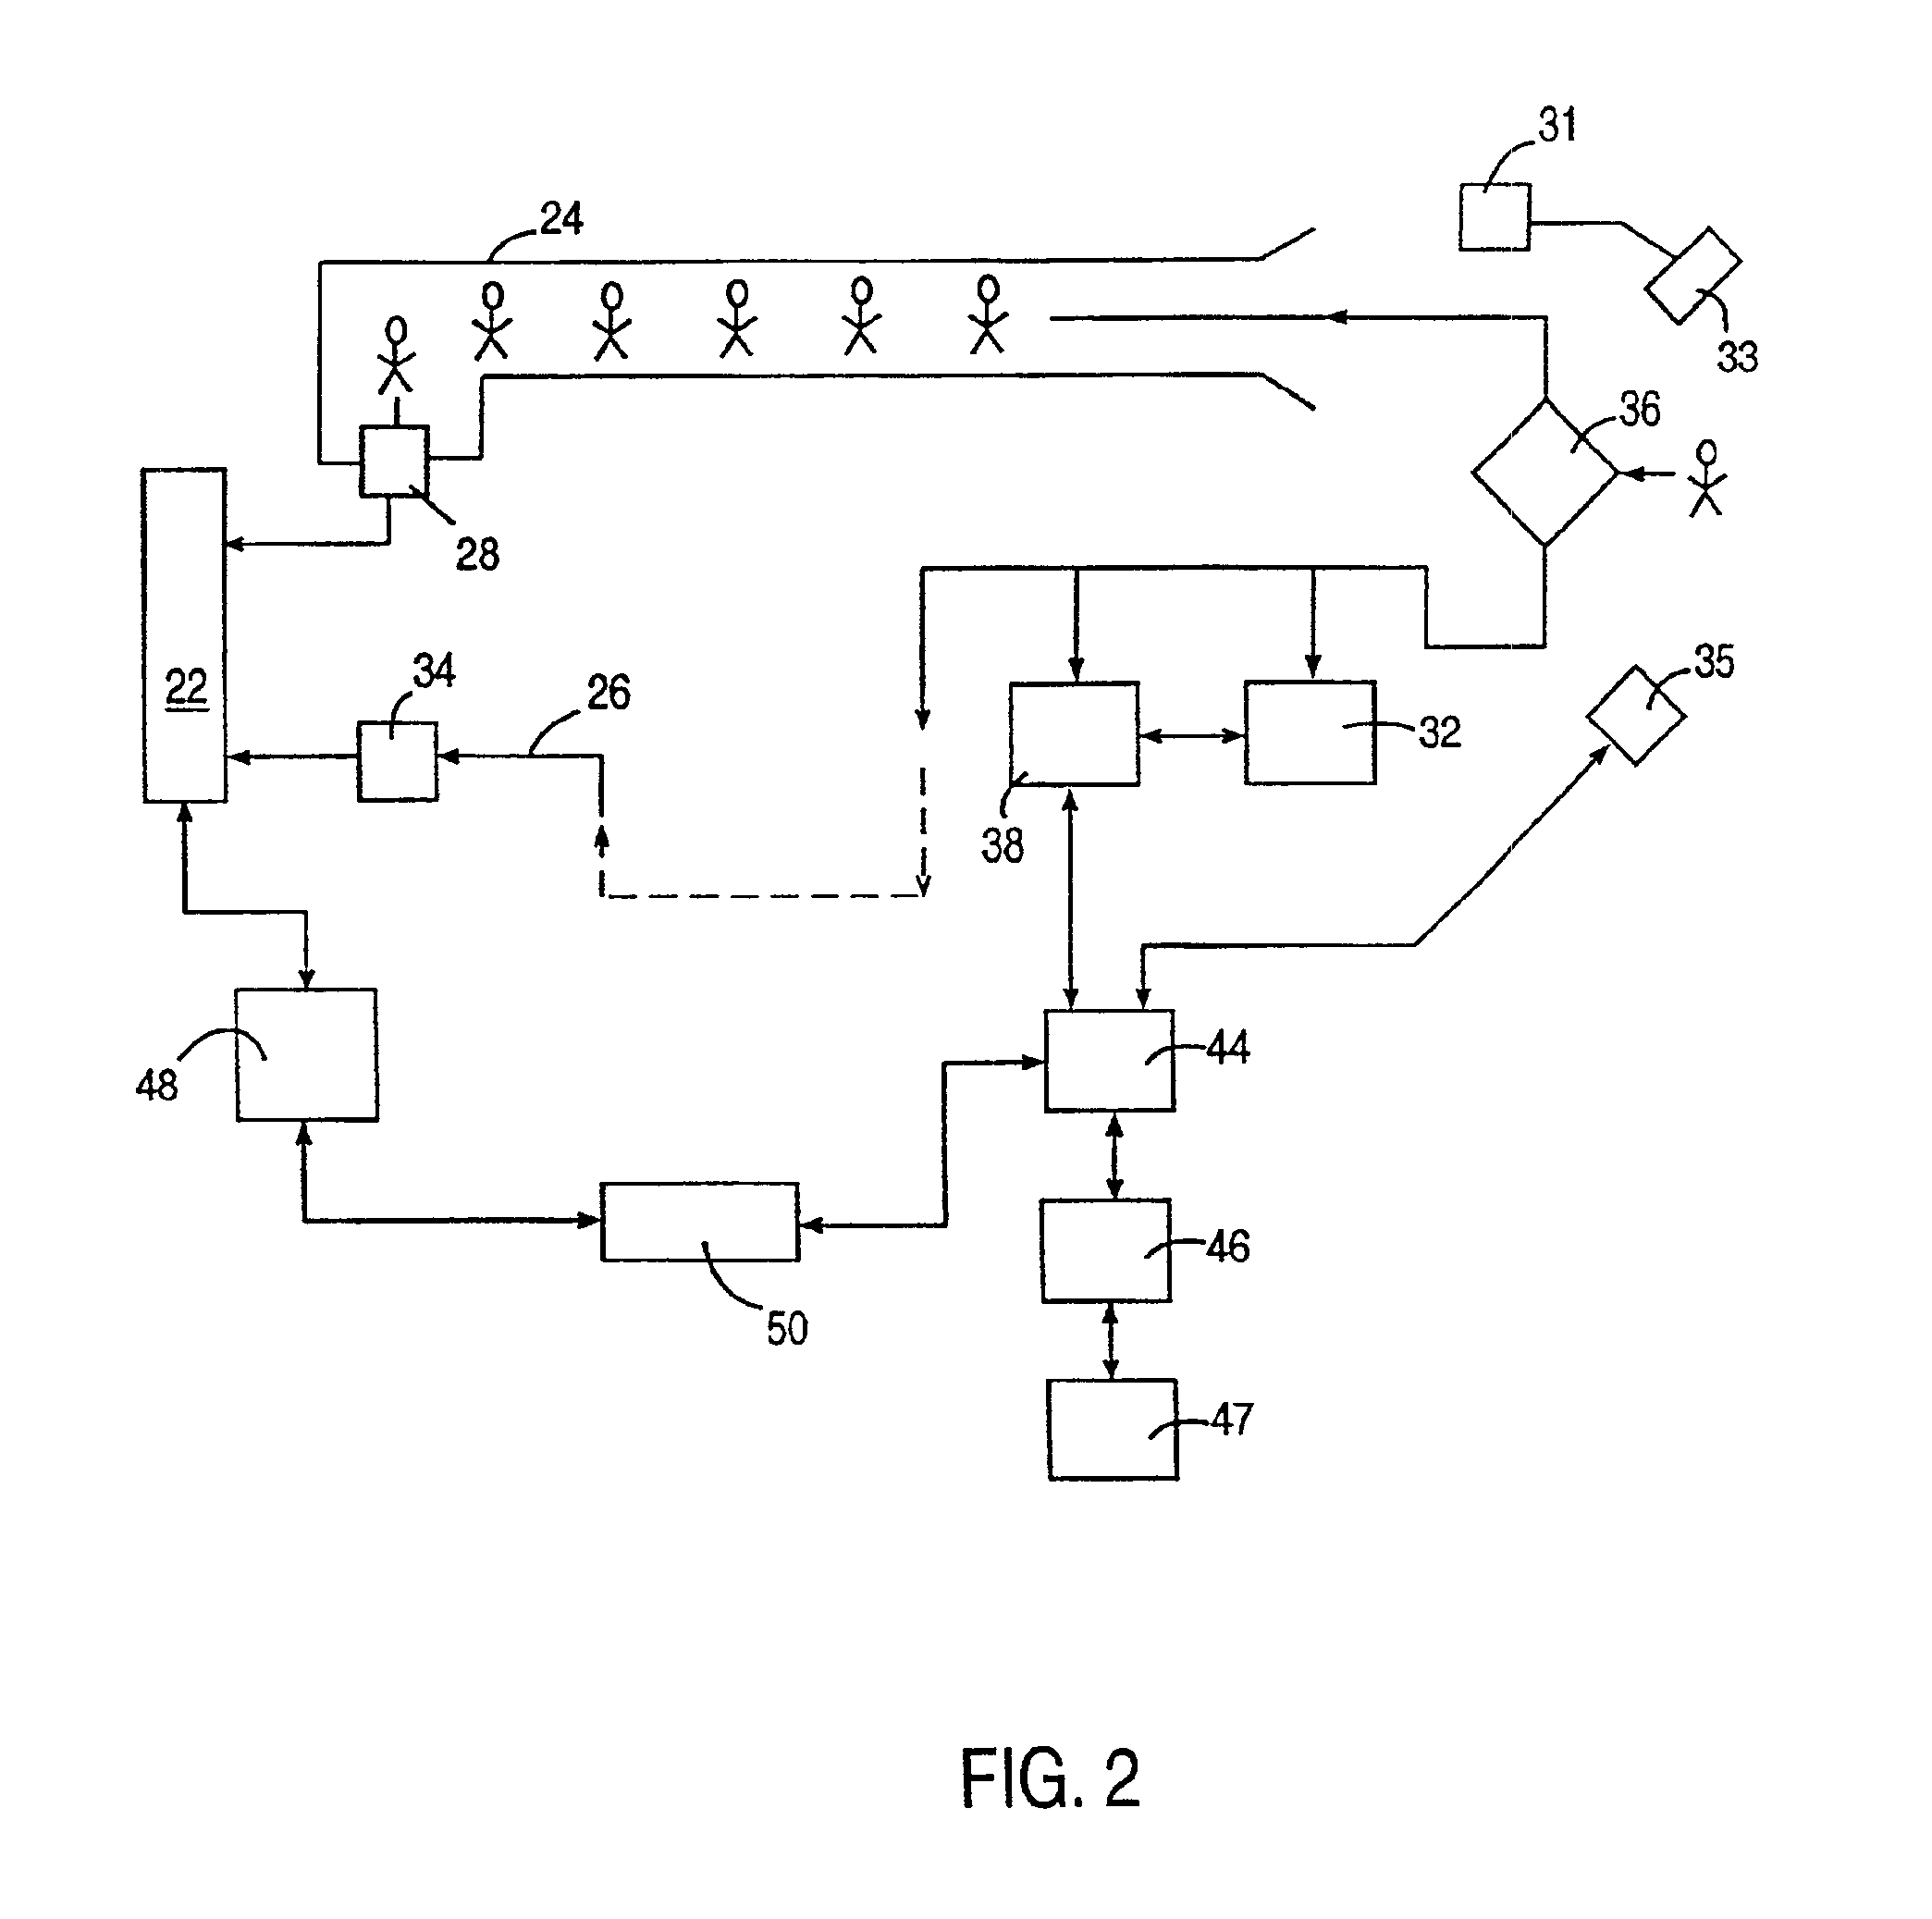 Method and apparatus for managing attraction admission